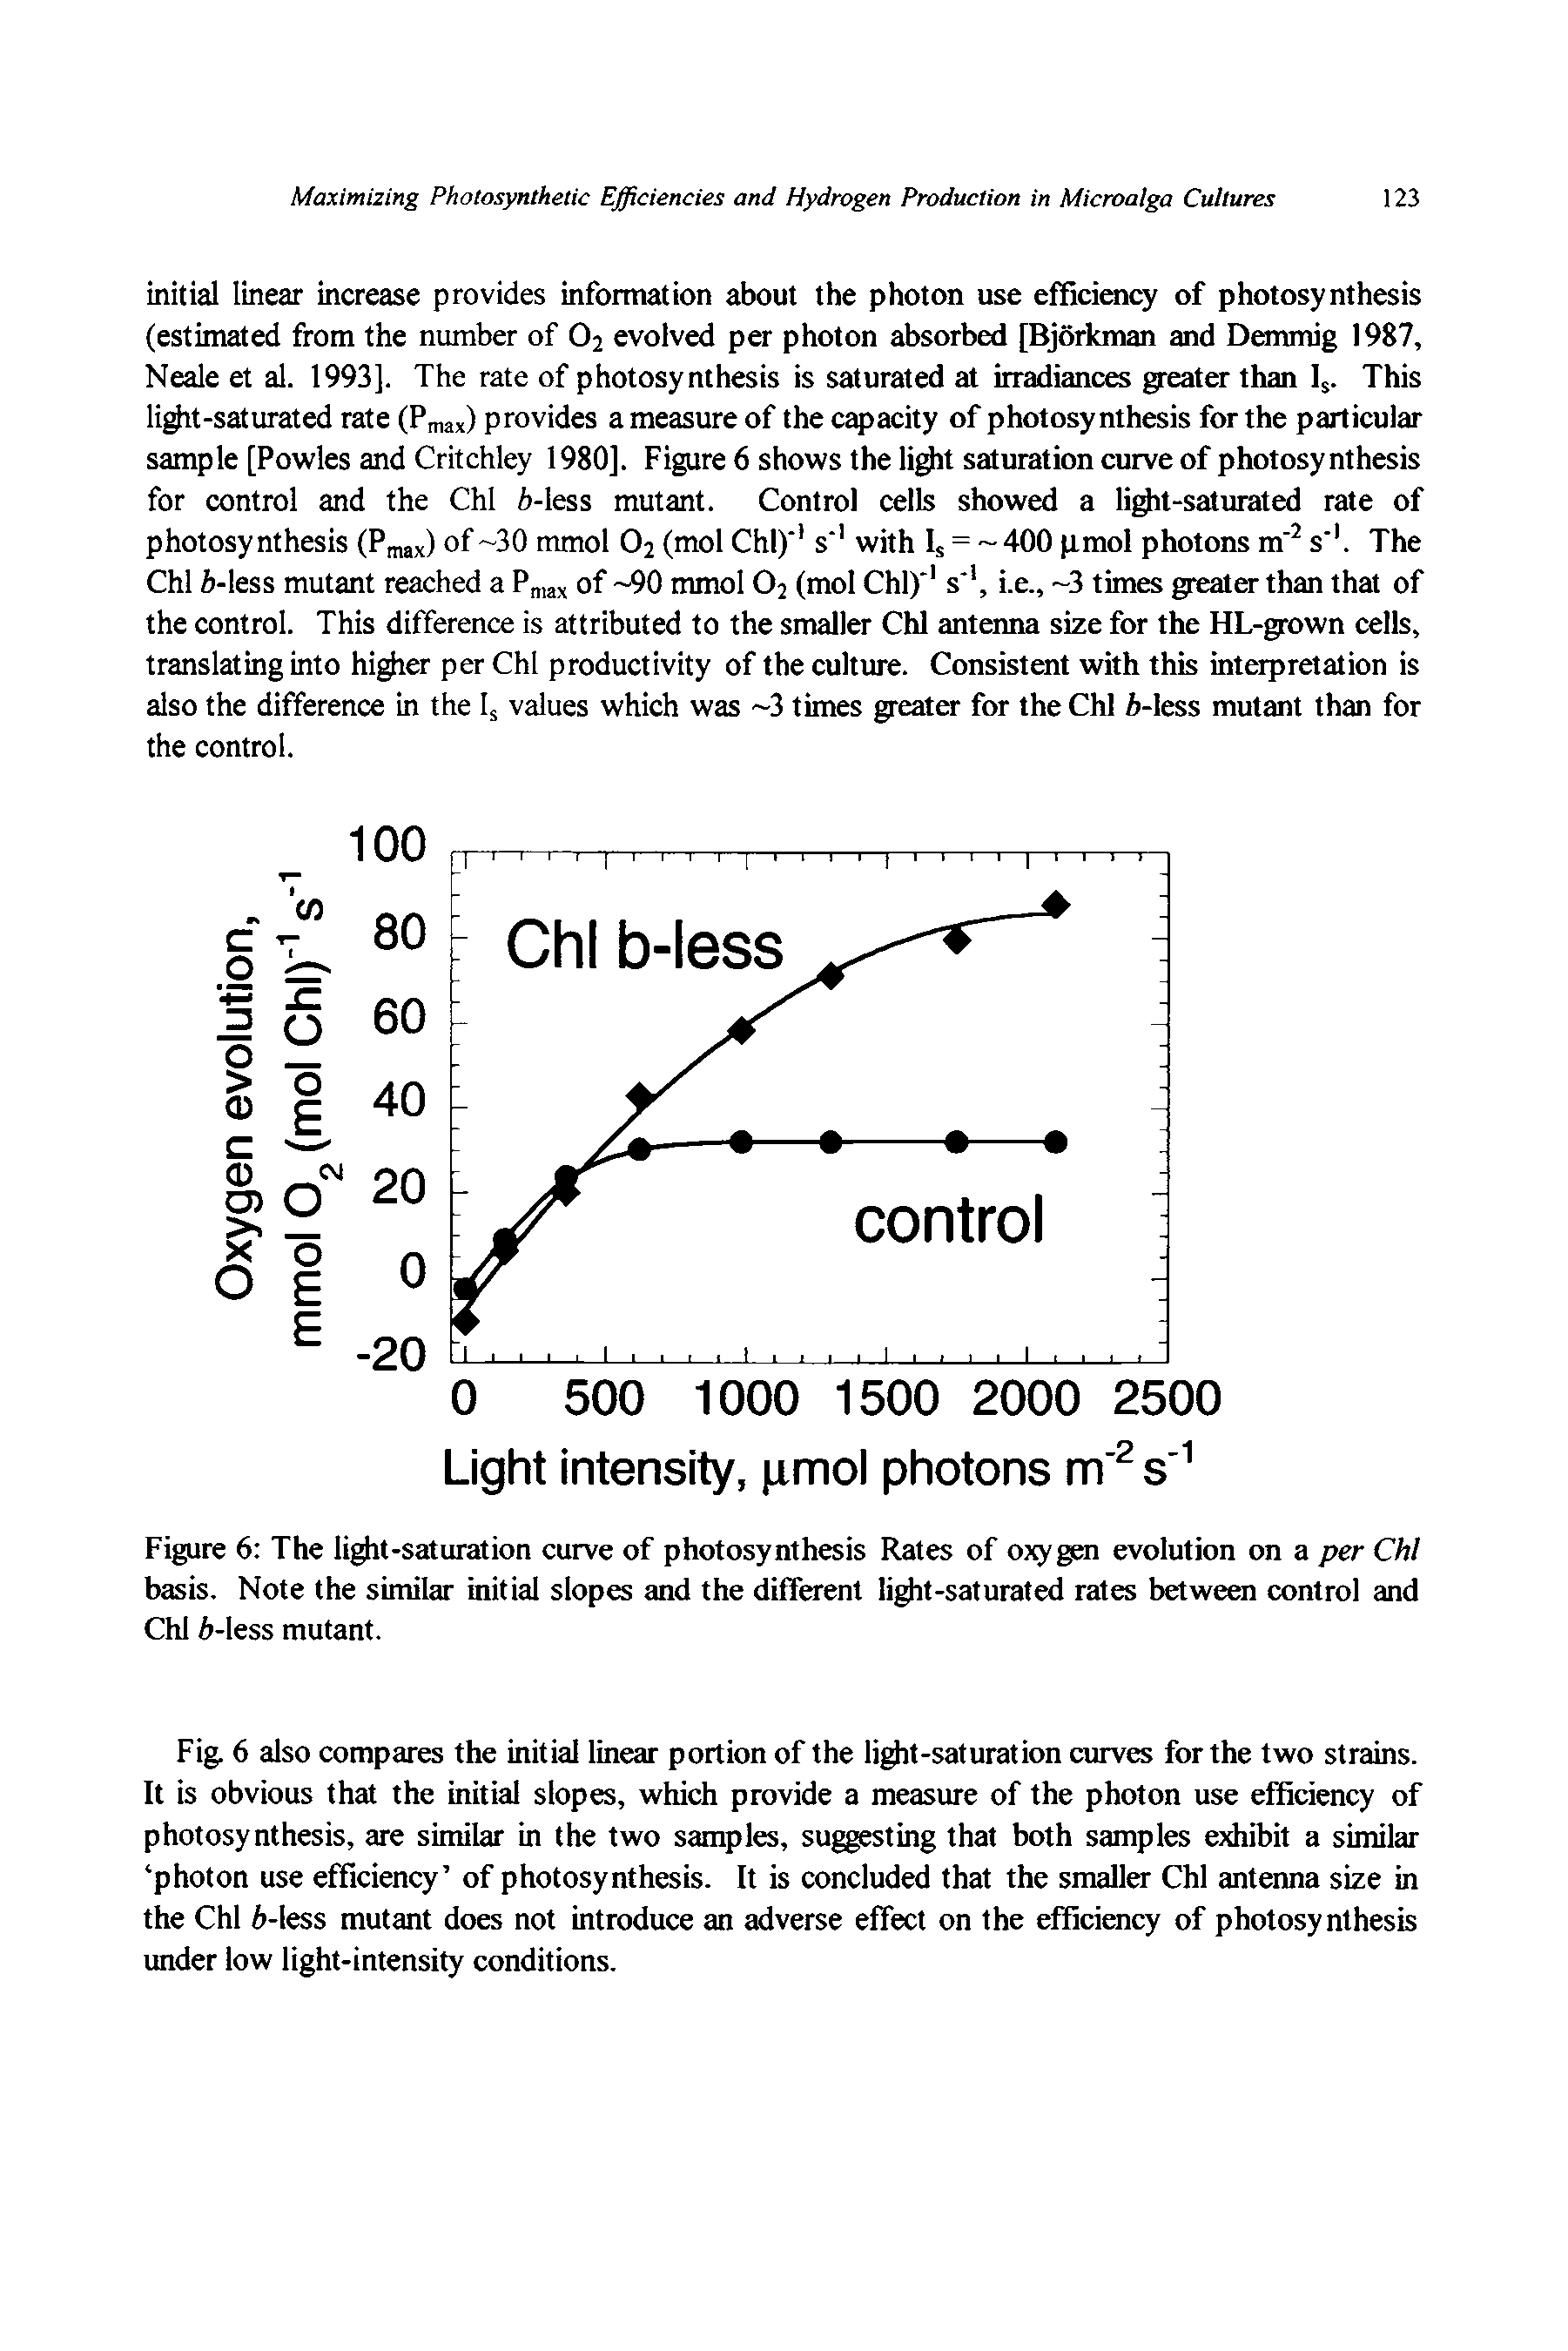 Figure 6 The light-saturation curve of photosynthesis Rates of oxygen evolution on a per Chi basis. Note the similar initial slopes and the different light-saturated rates between control and Chi A-less mutant.